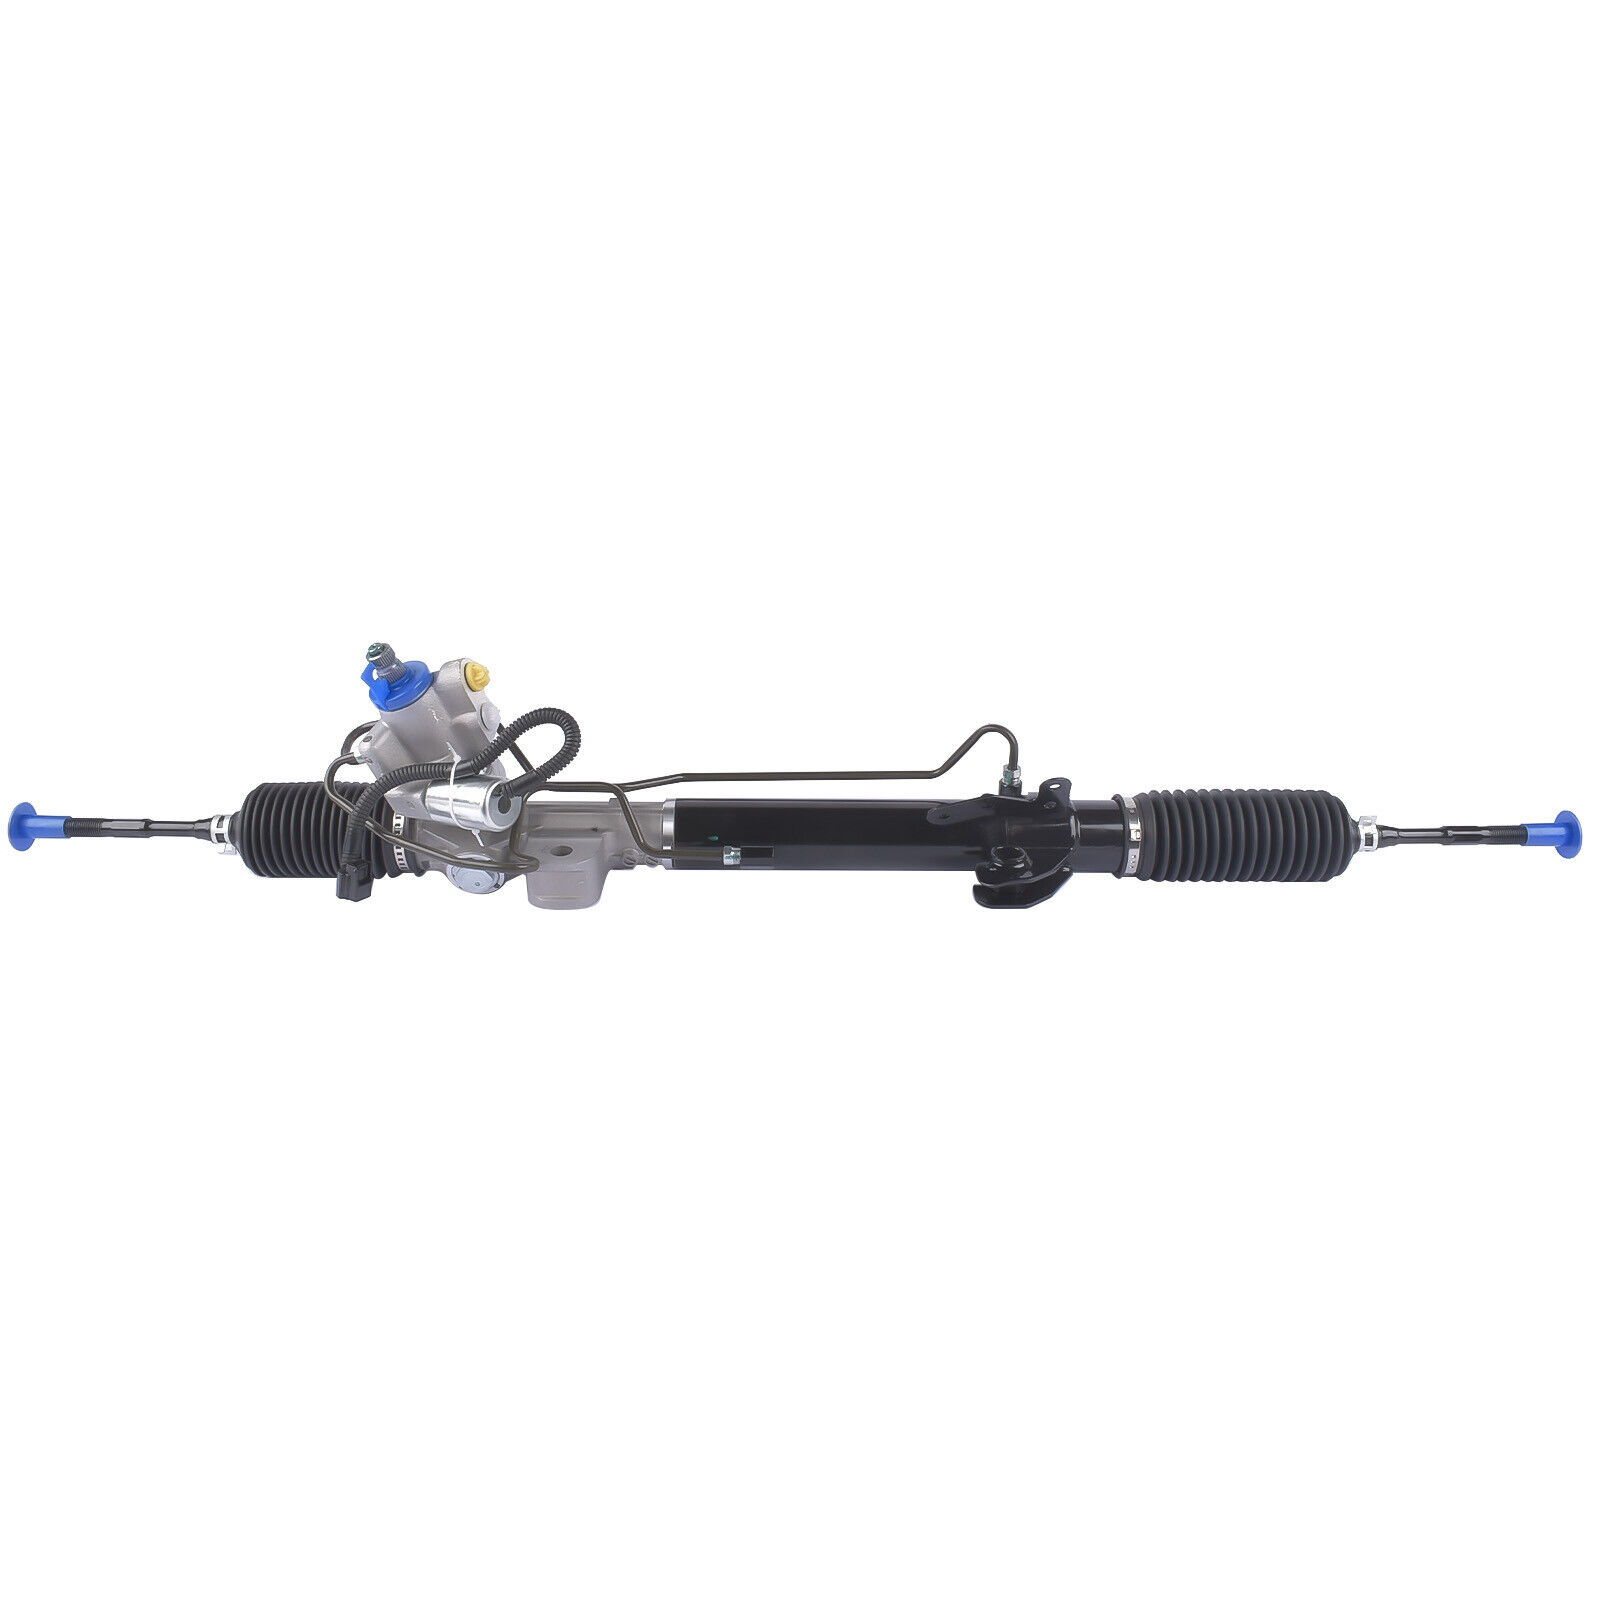 Fits 2009-2014 Nissan Maxima S, SV 3.5L V6 Power Steering Rack and Pinion Assy